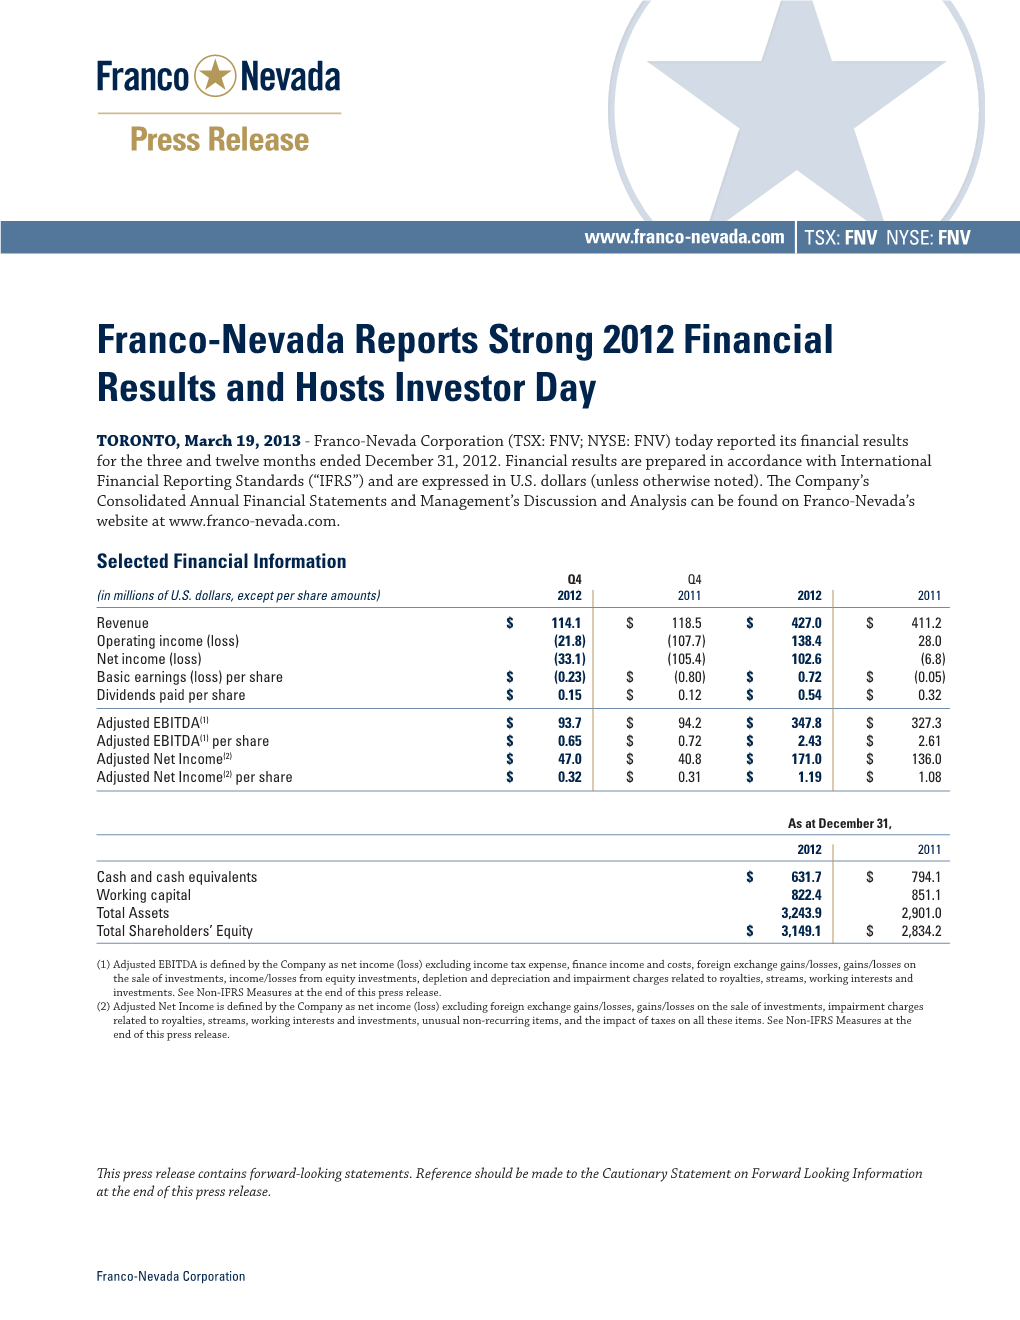 Franco-Nevada Reports Strong 2012 Financial Results and Hosts Investor Day